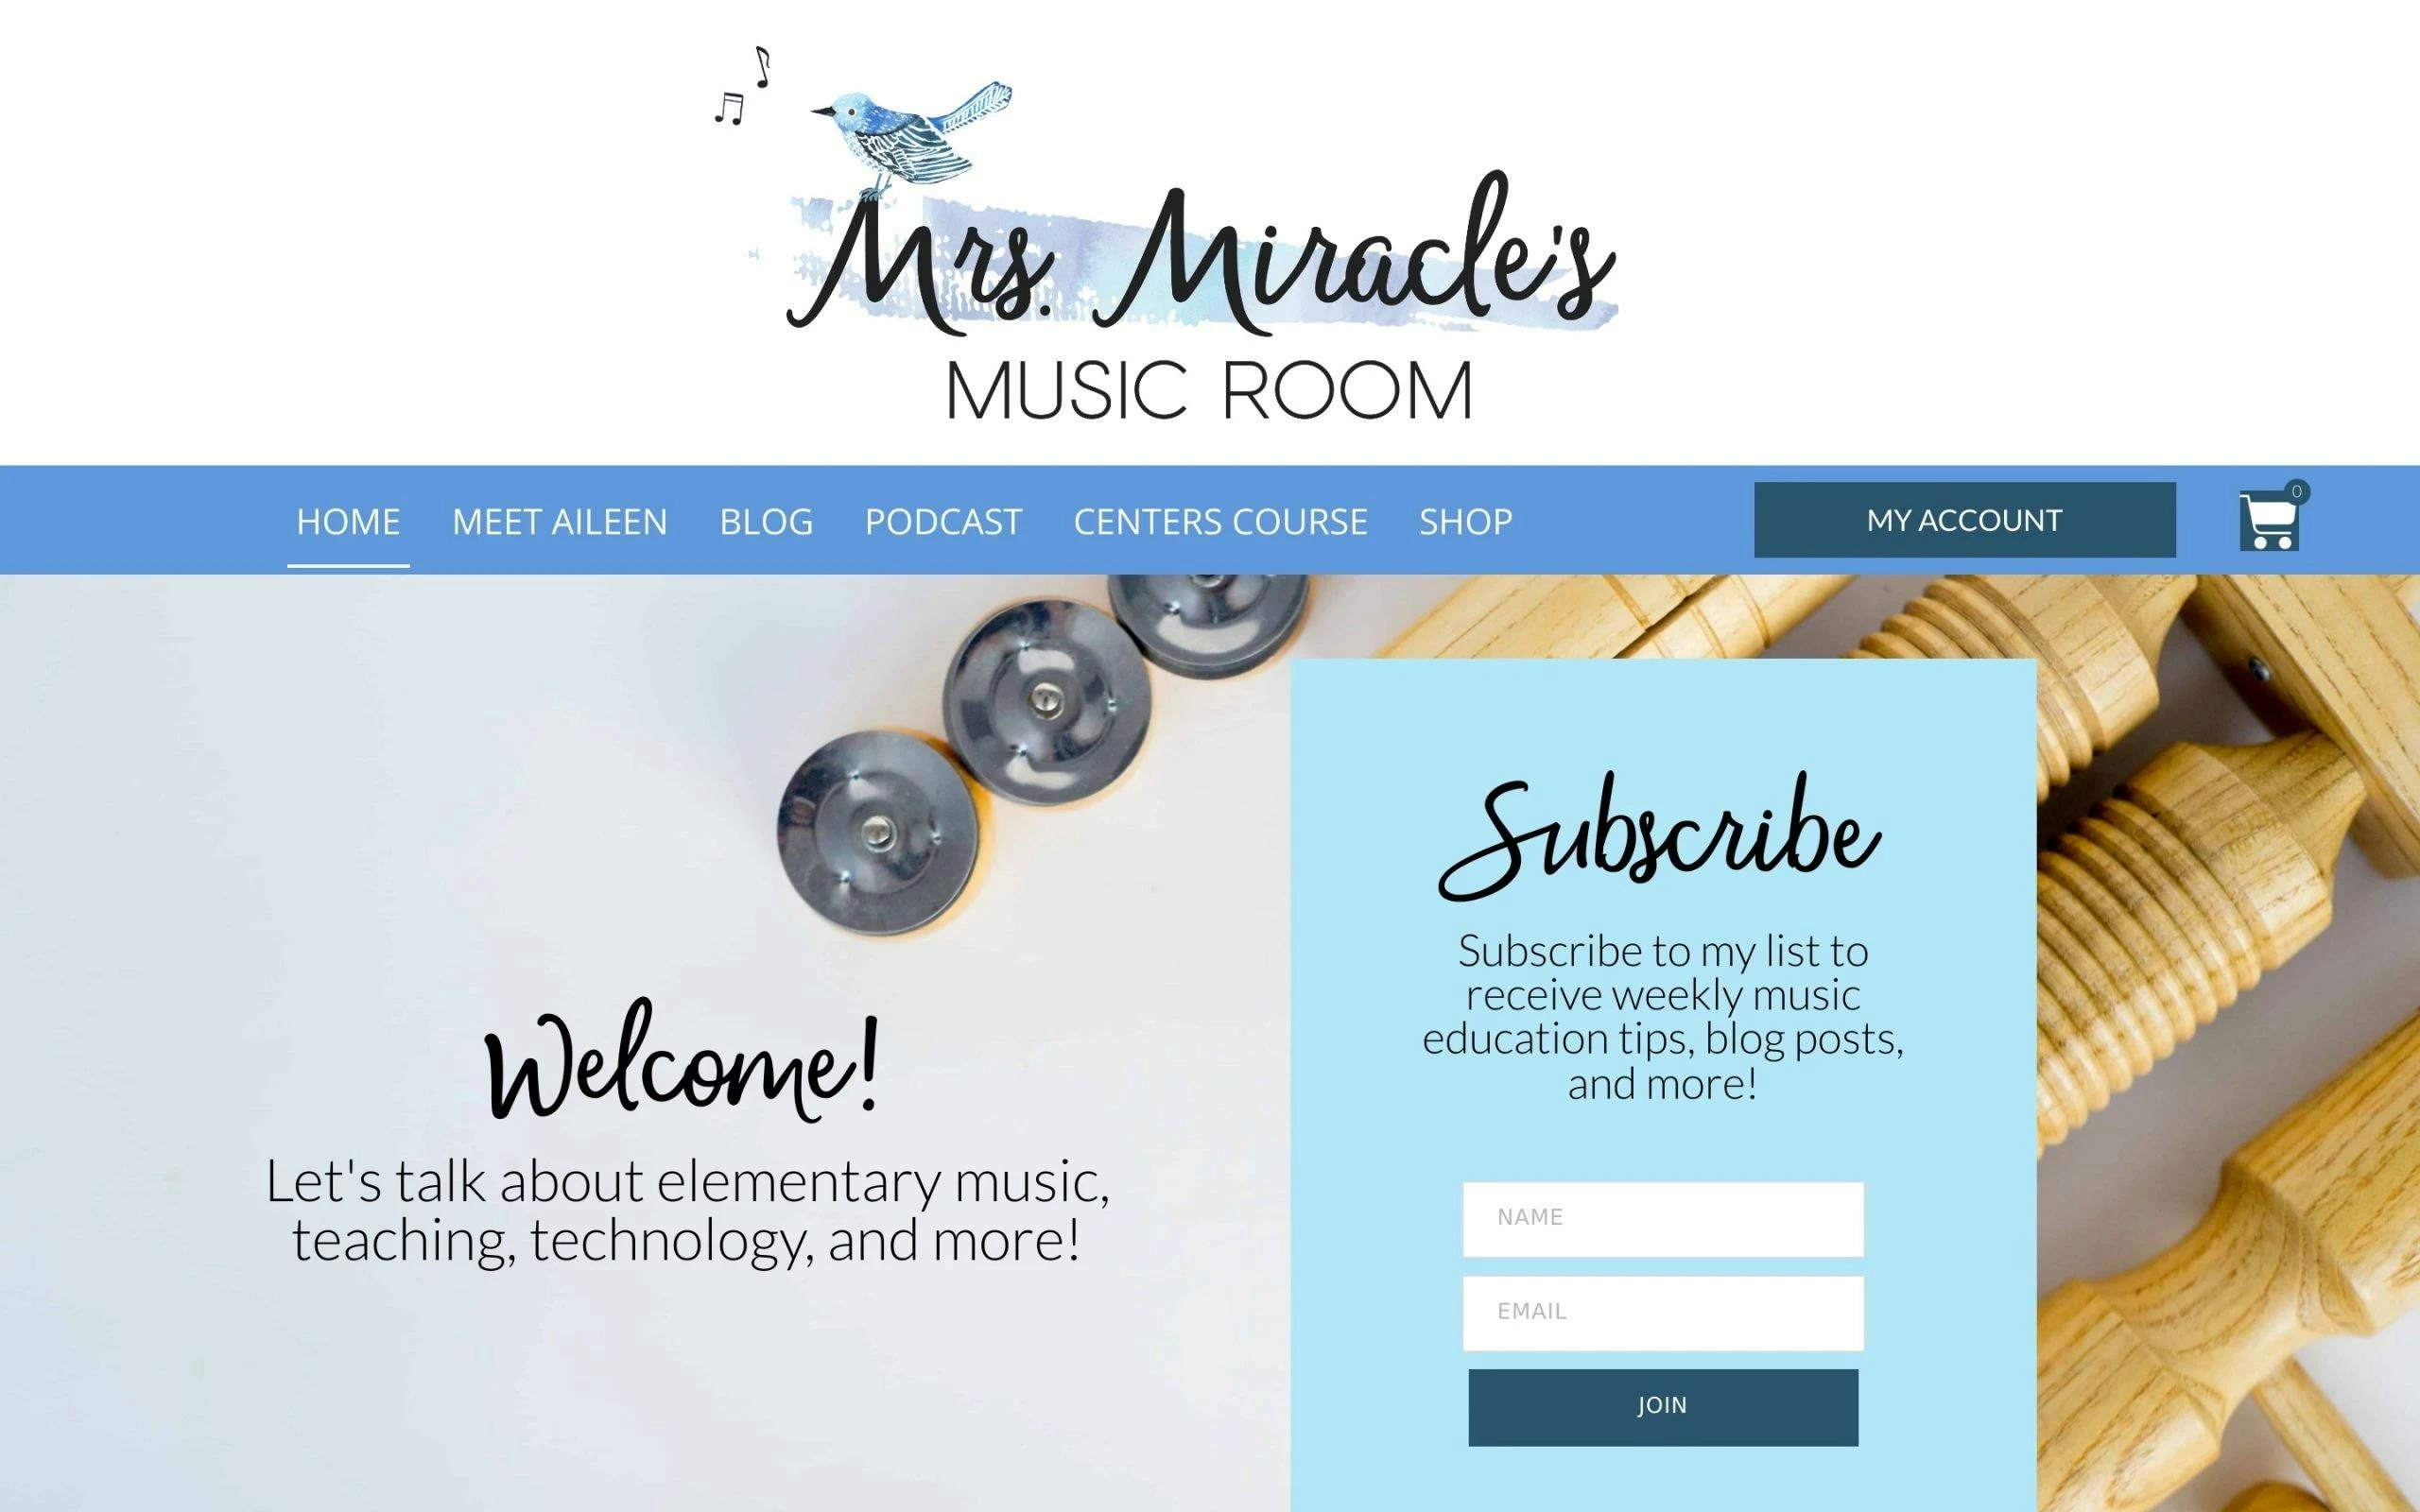 Mrs. Miracle’s Music Room music blog